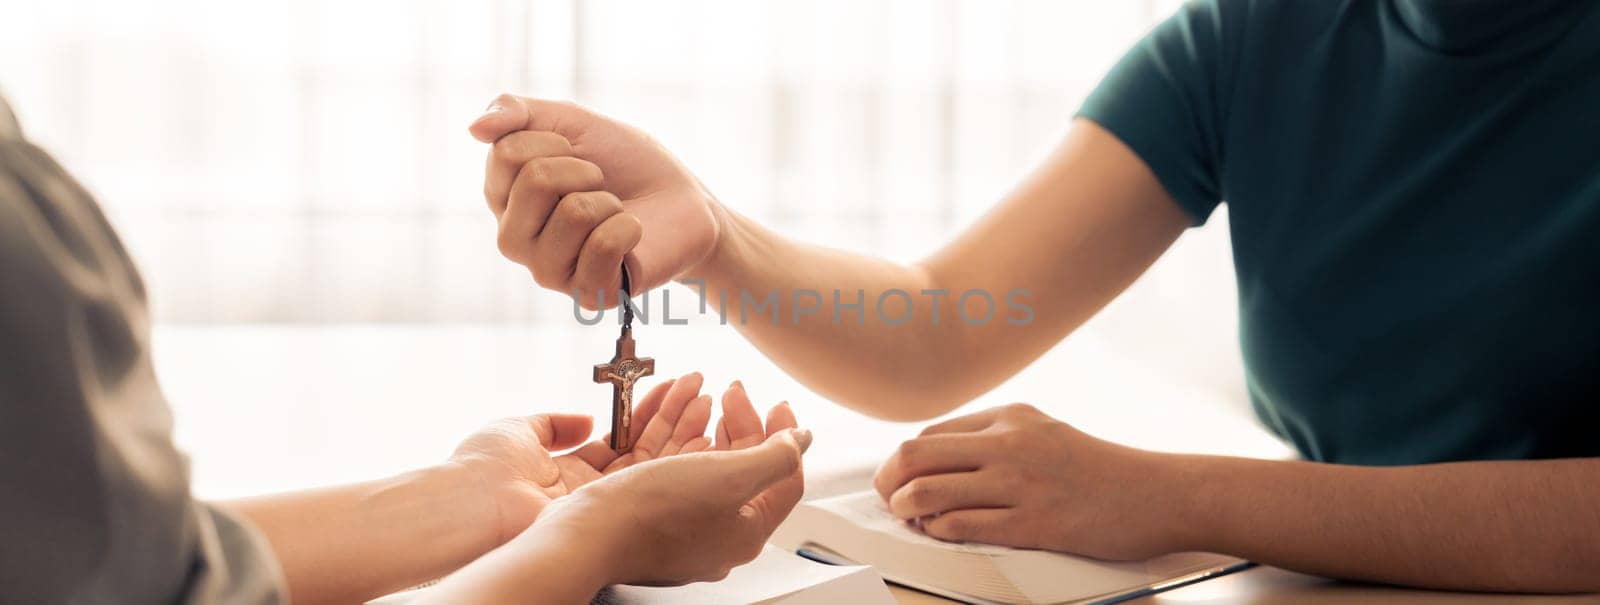 Close-up women prayer deliver holy bible book and holy cross to young believer. Spreading religion symbol. Concept of hope, religion, christianity and god blessing. Warm background. Burgeoning.